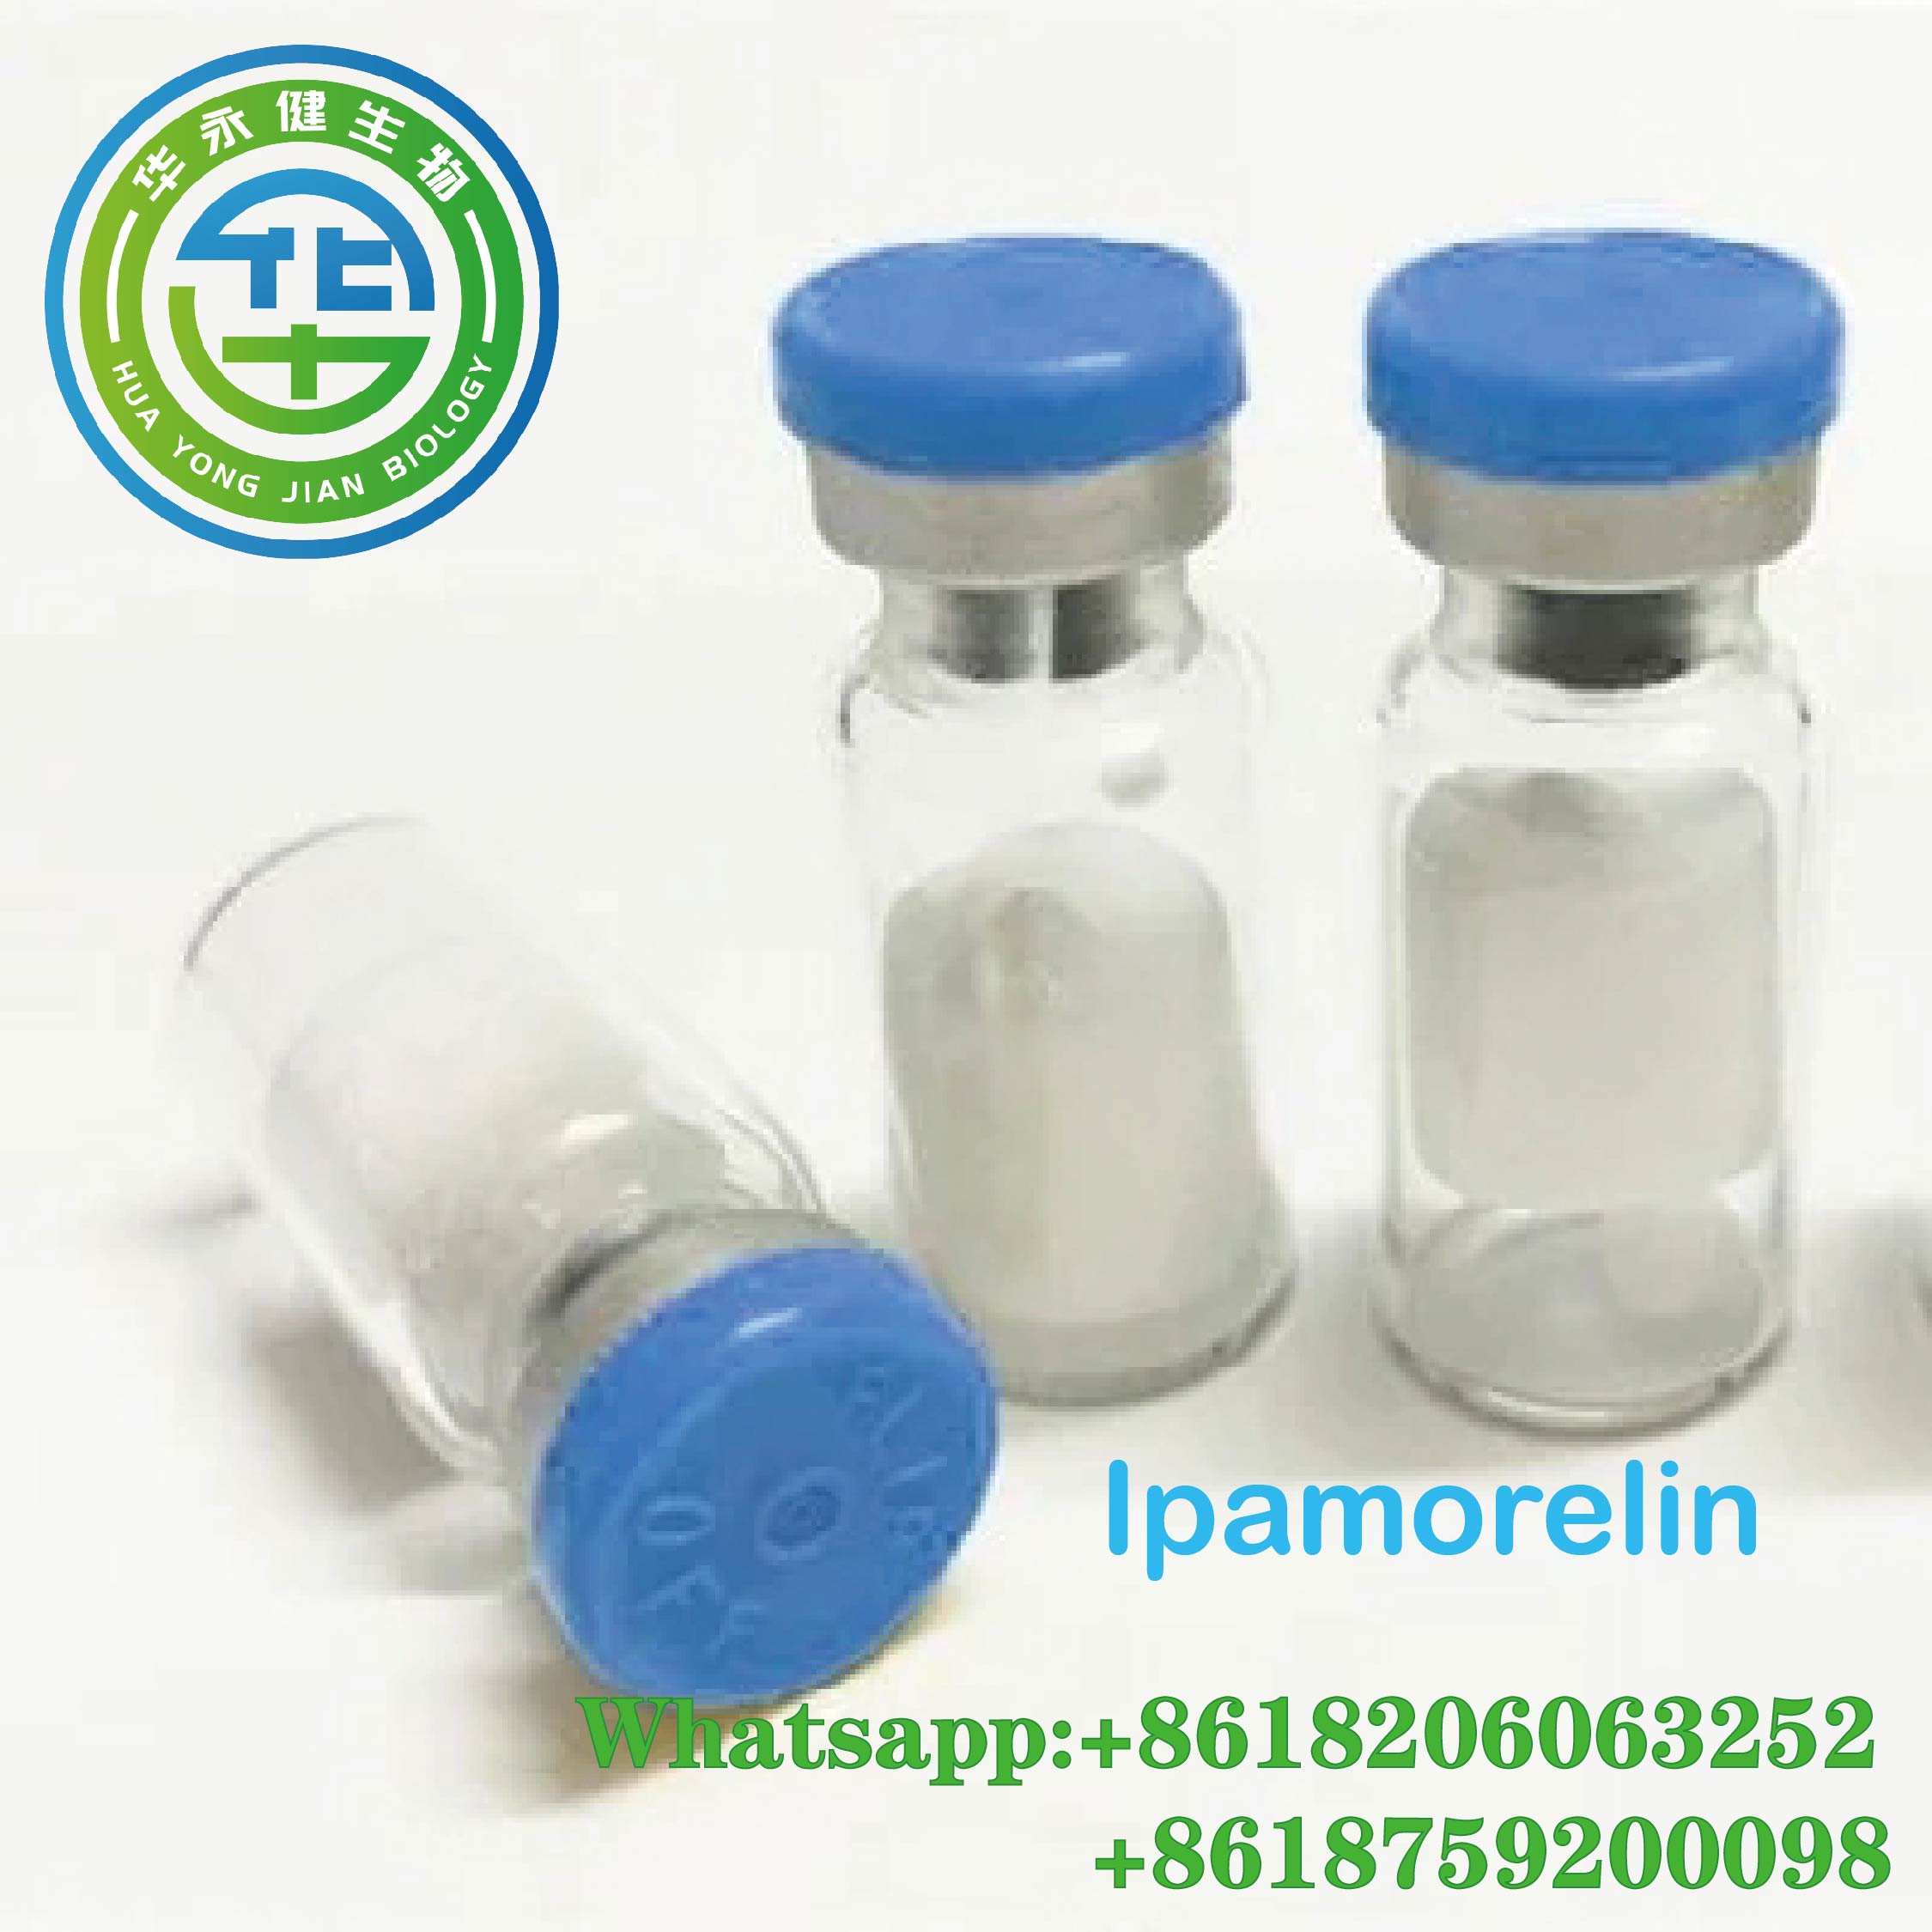 99.6% Purity Ipamorelin Peptide for Increased Energy and Improved Sleep and Mood